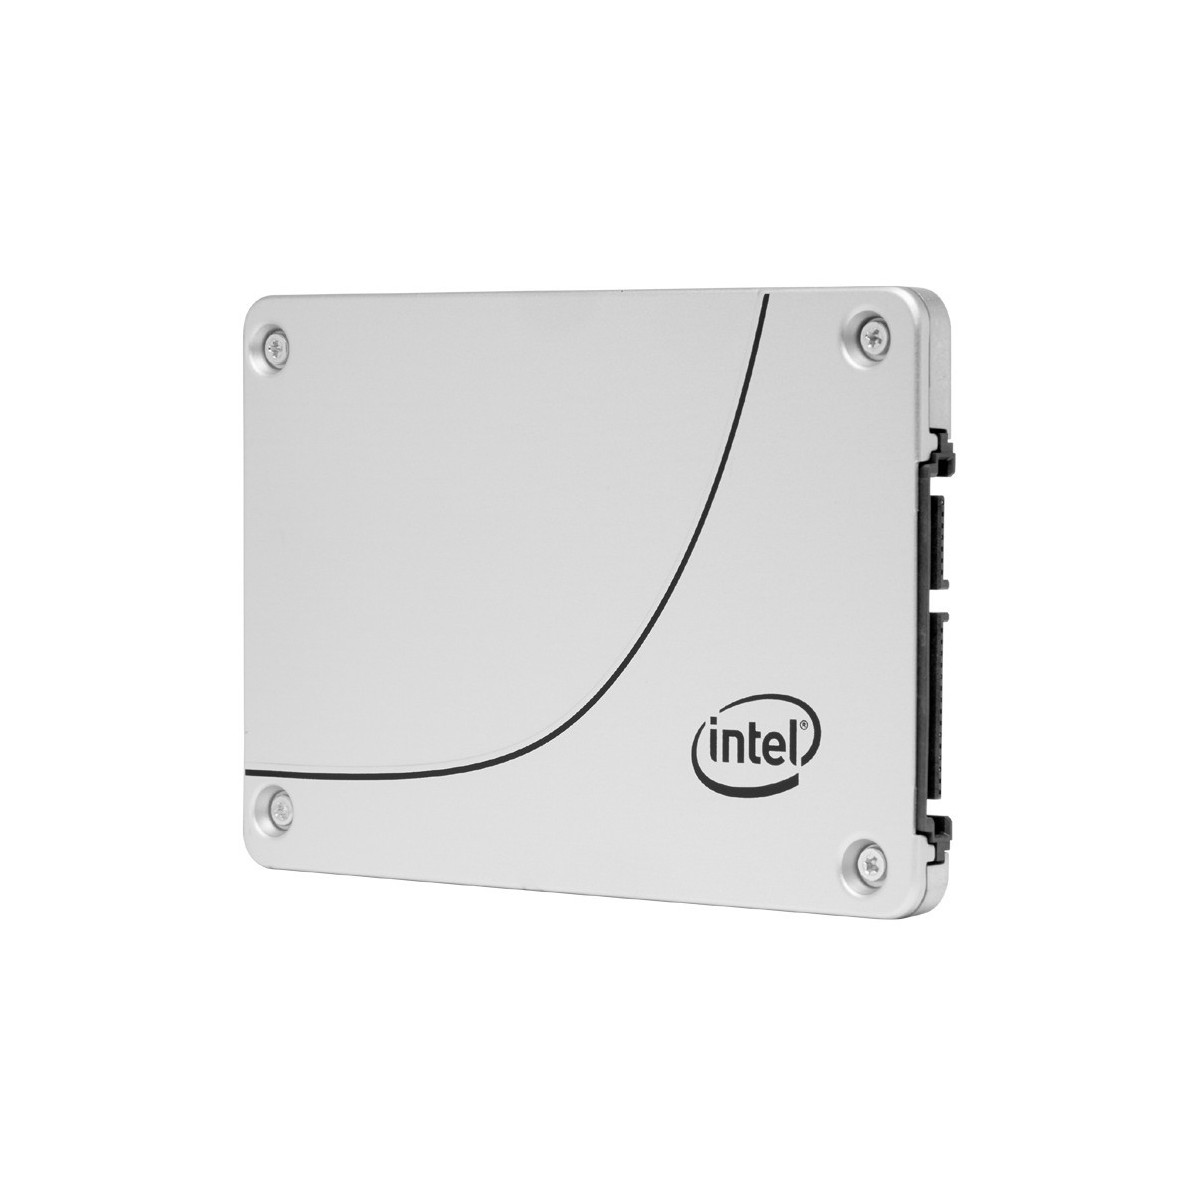 Intel Solid-State Drive DC S3520 Series 2.5 SATA 1,200 GB - Solid State Disk - Internal